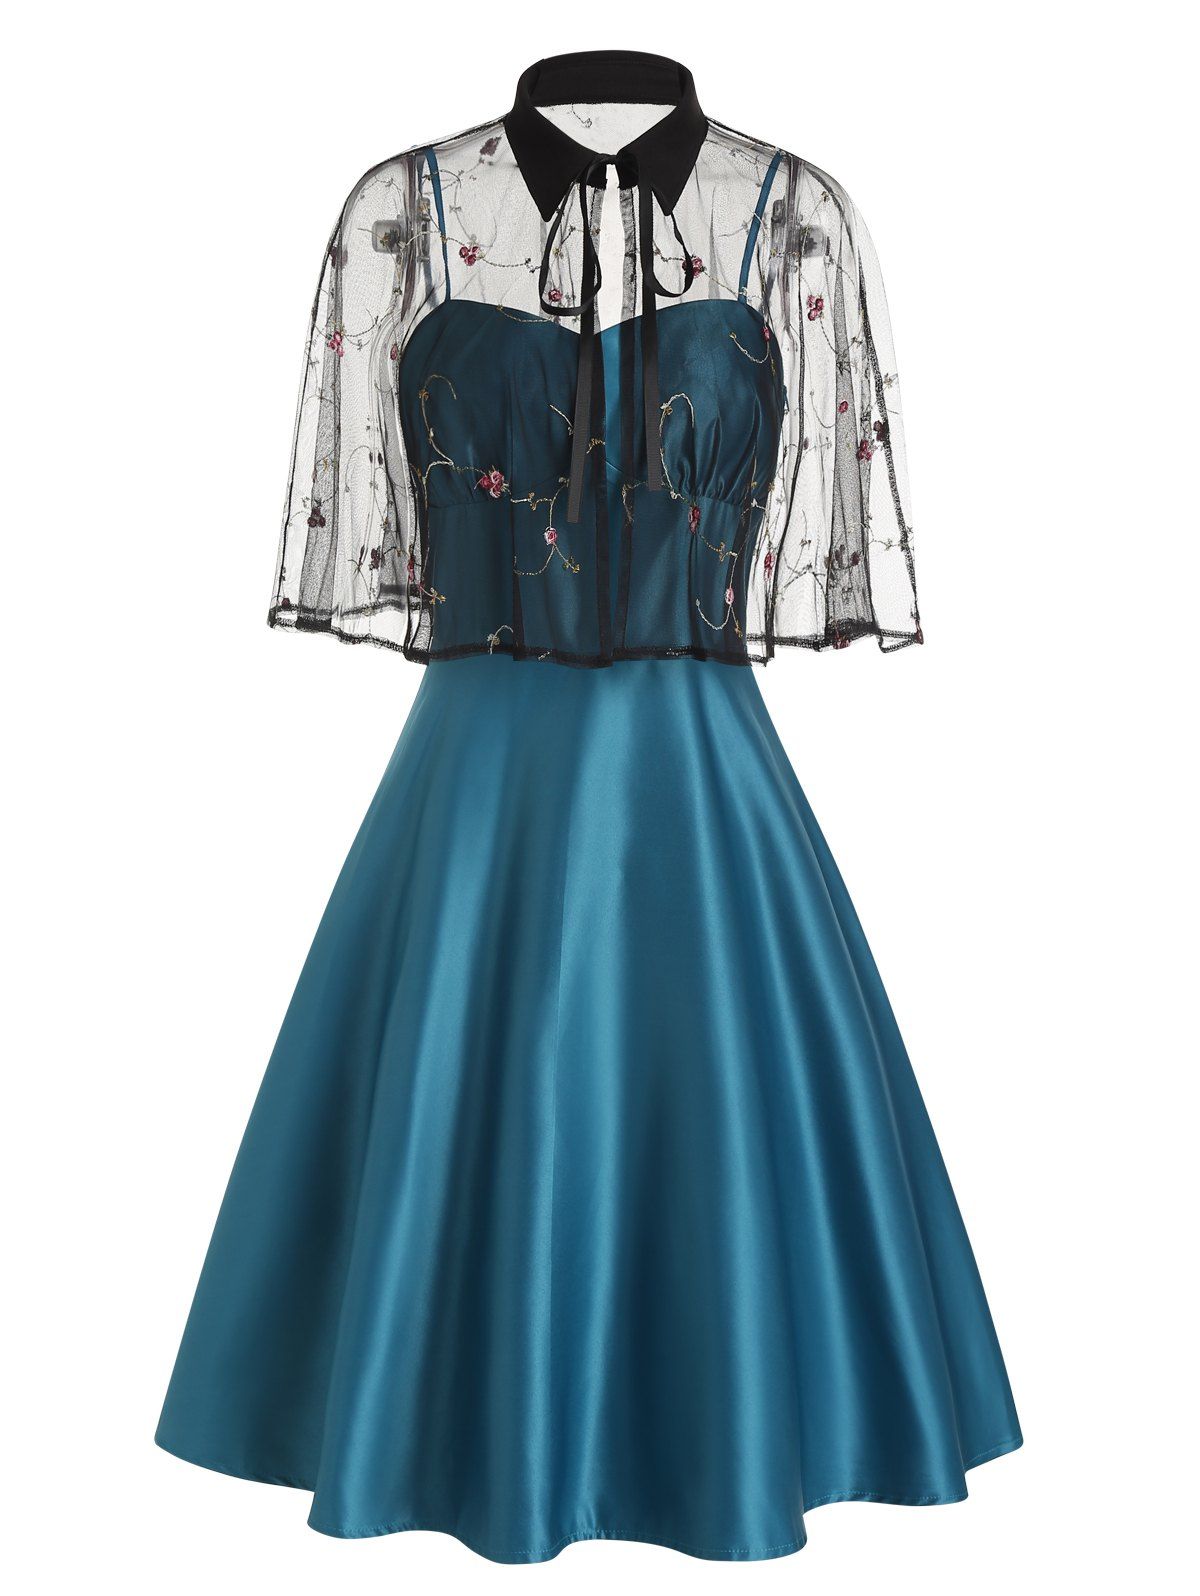 Party Dress Solid Color Empire Waist Sleeveless Midi Dress and Tied Floral Embroidered Lace Shawl Two Piece Set - BLUE L